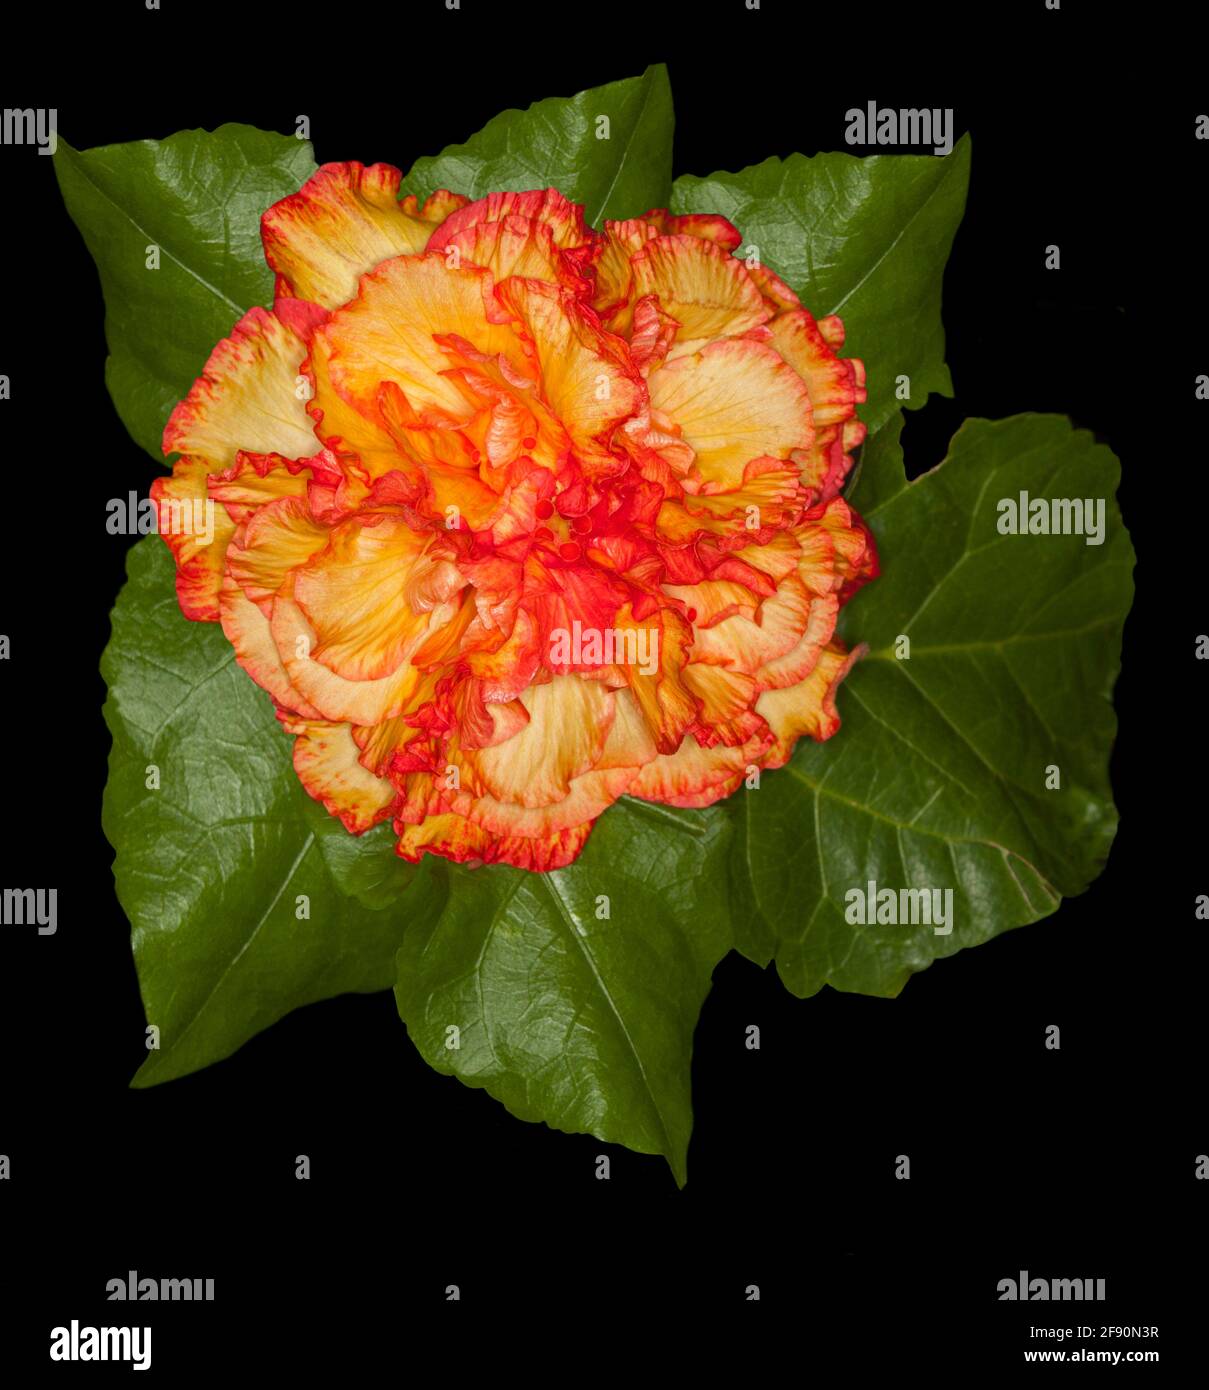 Stunning unusual double orange and yellow flower of Hibiscus rosa-sinsensis 'Rainbow Fire' and green leaves on black background Stock Photo